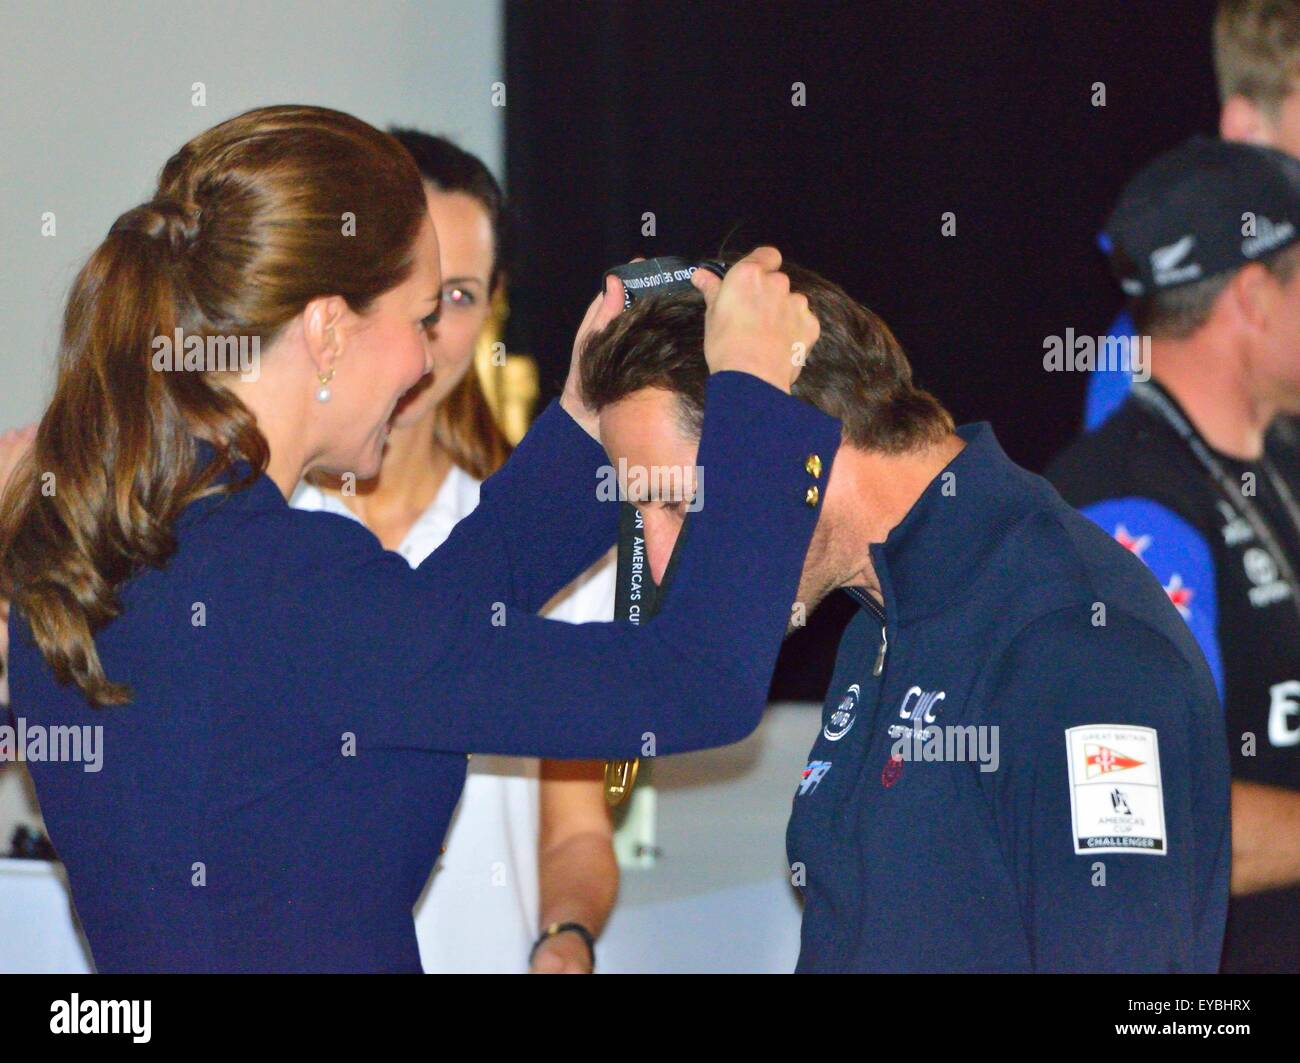 Portsmouth, Hampshire, UK. 26th July, 2015. The Duke and Duchess of Cambridge present Sir Ben Ainslie, skipper of the British 'Land Rover BAR' team with the cup for winning the Louis Vuitton America's Cup World Series Portsmouth at the official prize giving.  The cup was designed by 5 year old Leo Howard from a local school on behalf of the 1851 Trust and made by artist Michelle Littlewood Credit:  Wendy Johnson/Alamy Live News  (photographer media accredited for this event) Stock Photo